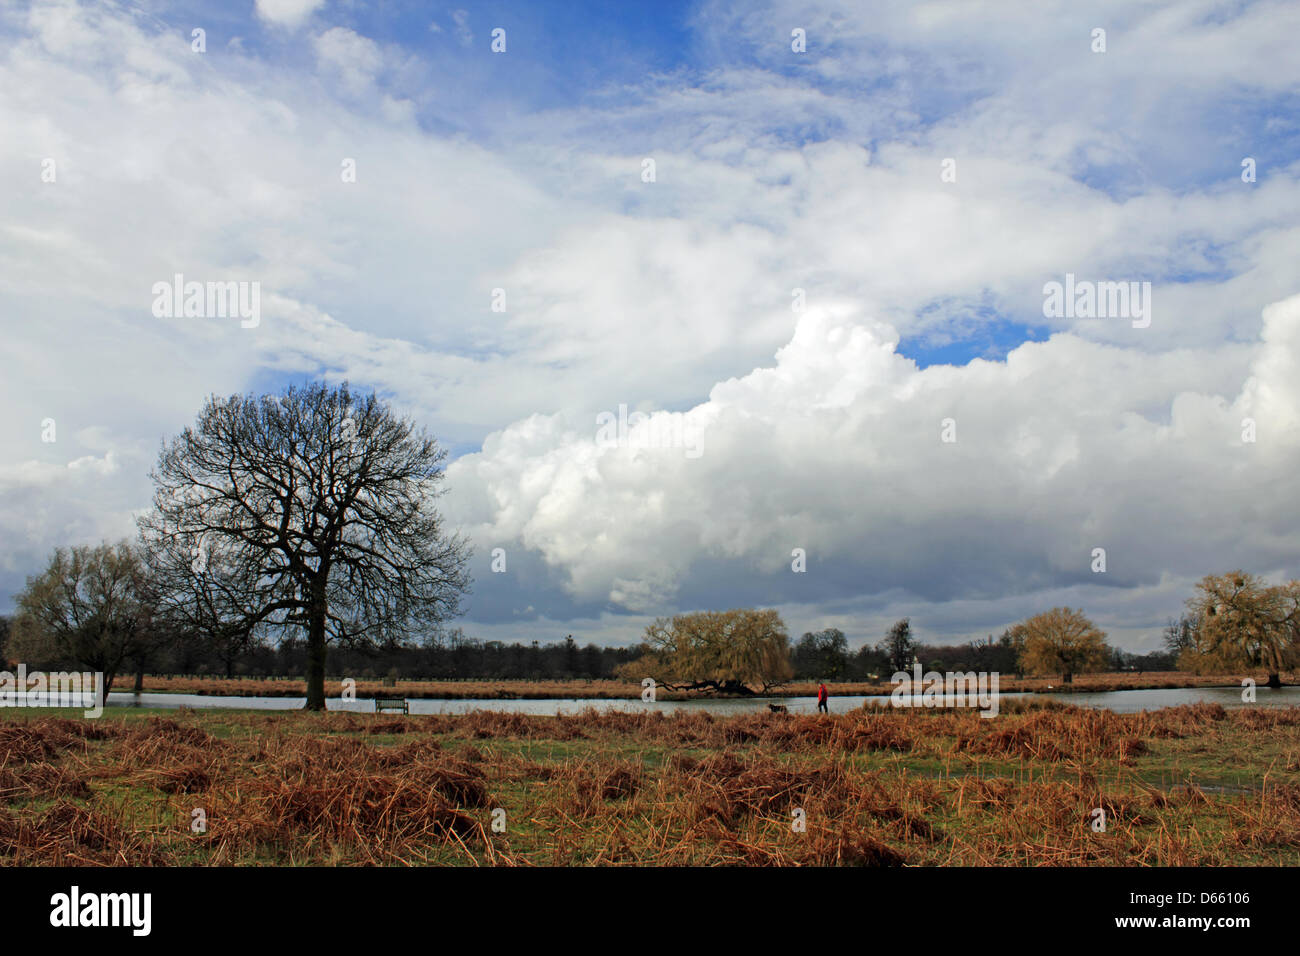 The Heron Pond in Bushy Park, SW London, England, UK.  12th April 2013. Stormy skies and heavy showers were the latest weather conditions in Southern England today. Credit: Julia Gavin / Alamy Live News Stock Photo